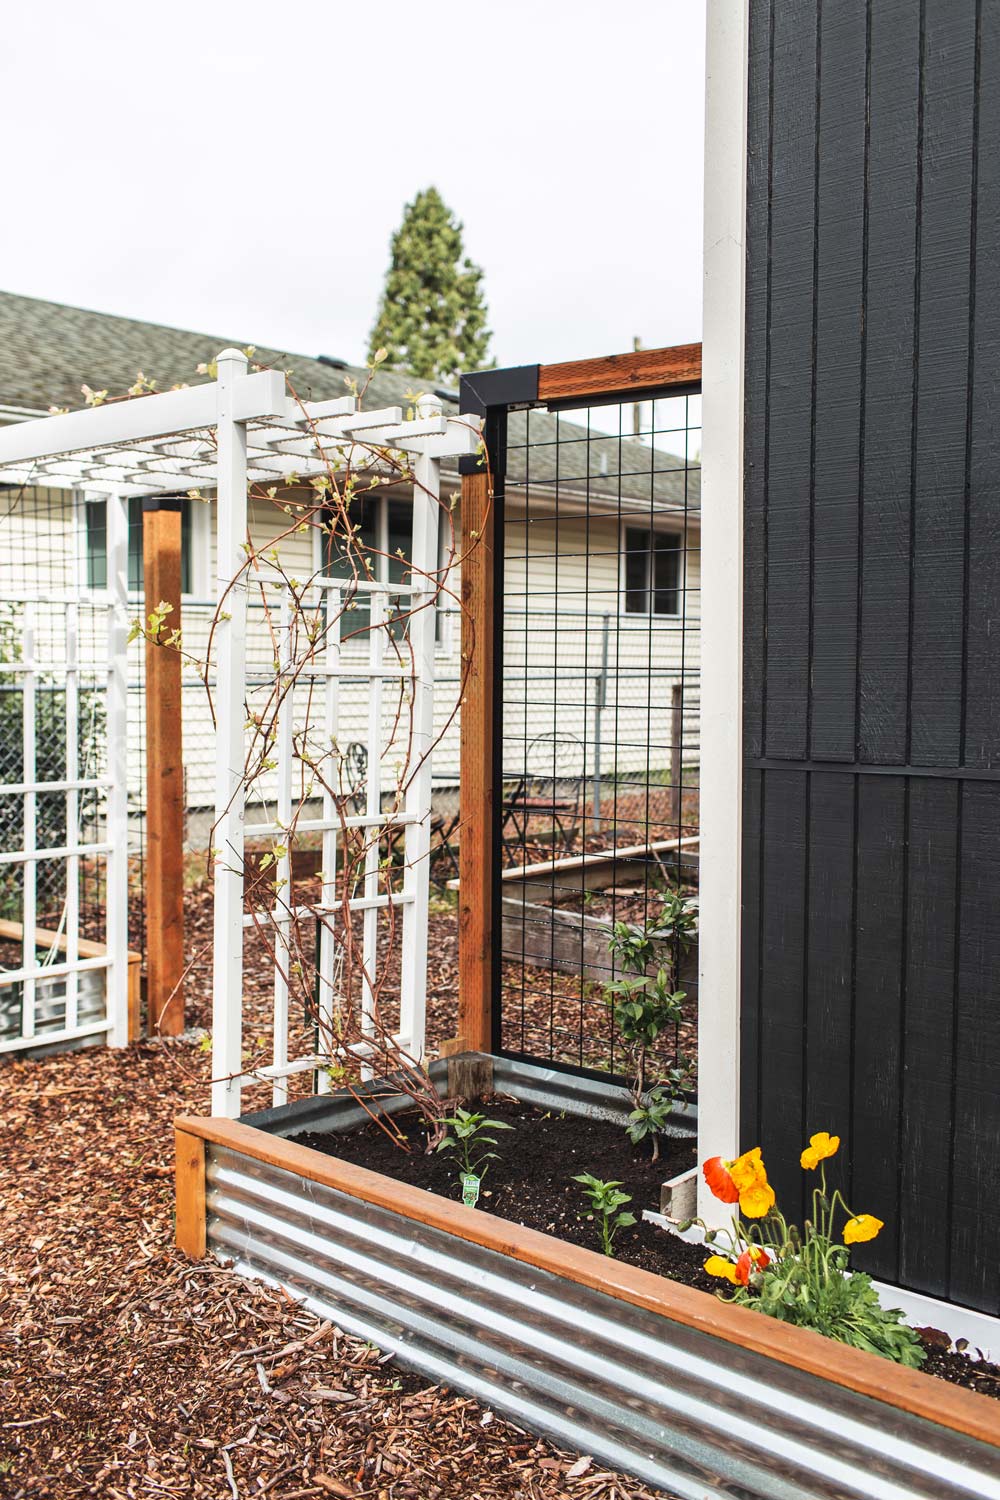 Backyard space with a trellis and garden bed.